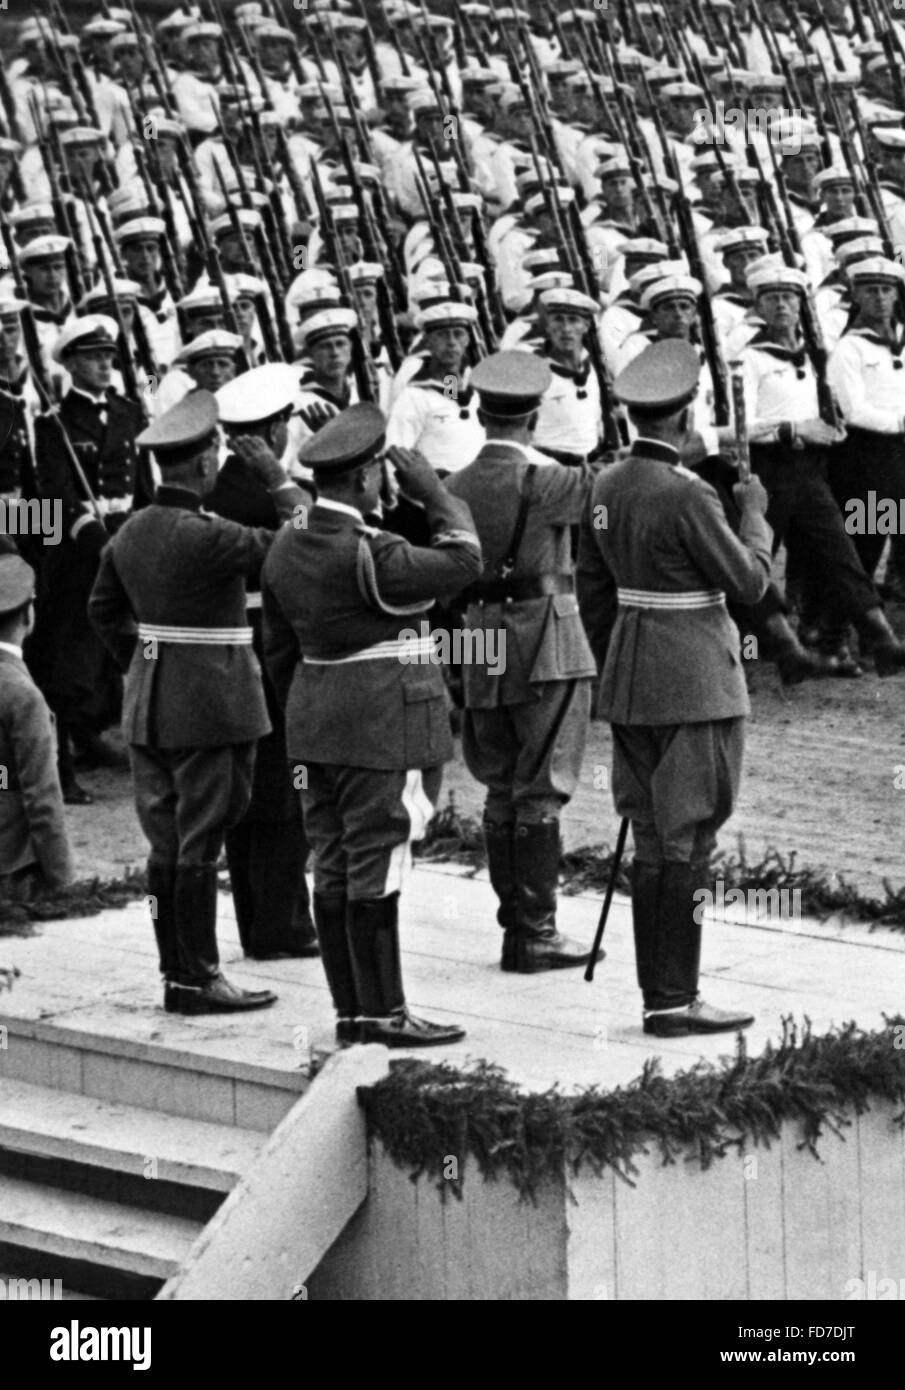 Kriegsmarine (War Navy) on the Day of the Wehrmacht during the Nuremberg Rally, 1937 Stock Photo